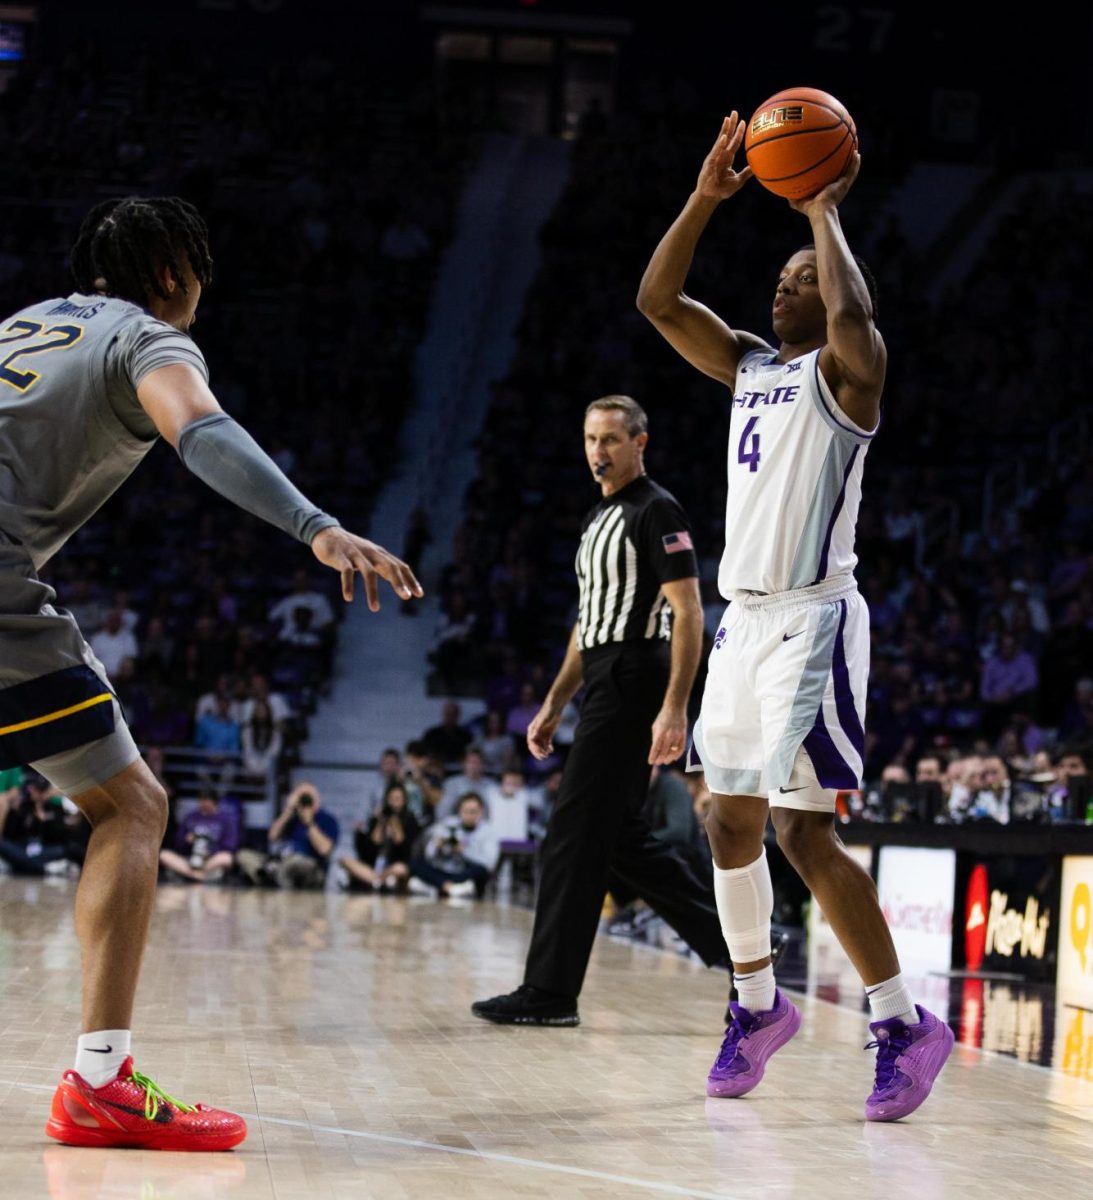 Dai+Dai+Ames+shoots+a+3-pointer+in+the+game+against+West+Virginia+University+on+Feb.+26%2C+2024+in+Bramlage+Coliseum.+The+Wildcats+beat+the+Mountaineers+in+overtime+94-90.+